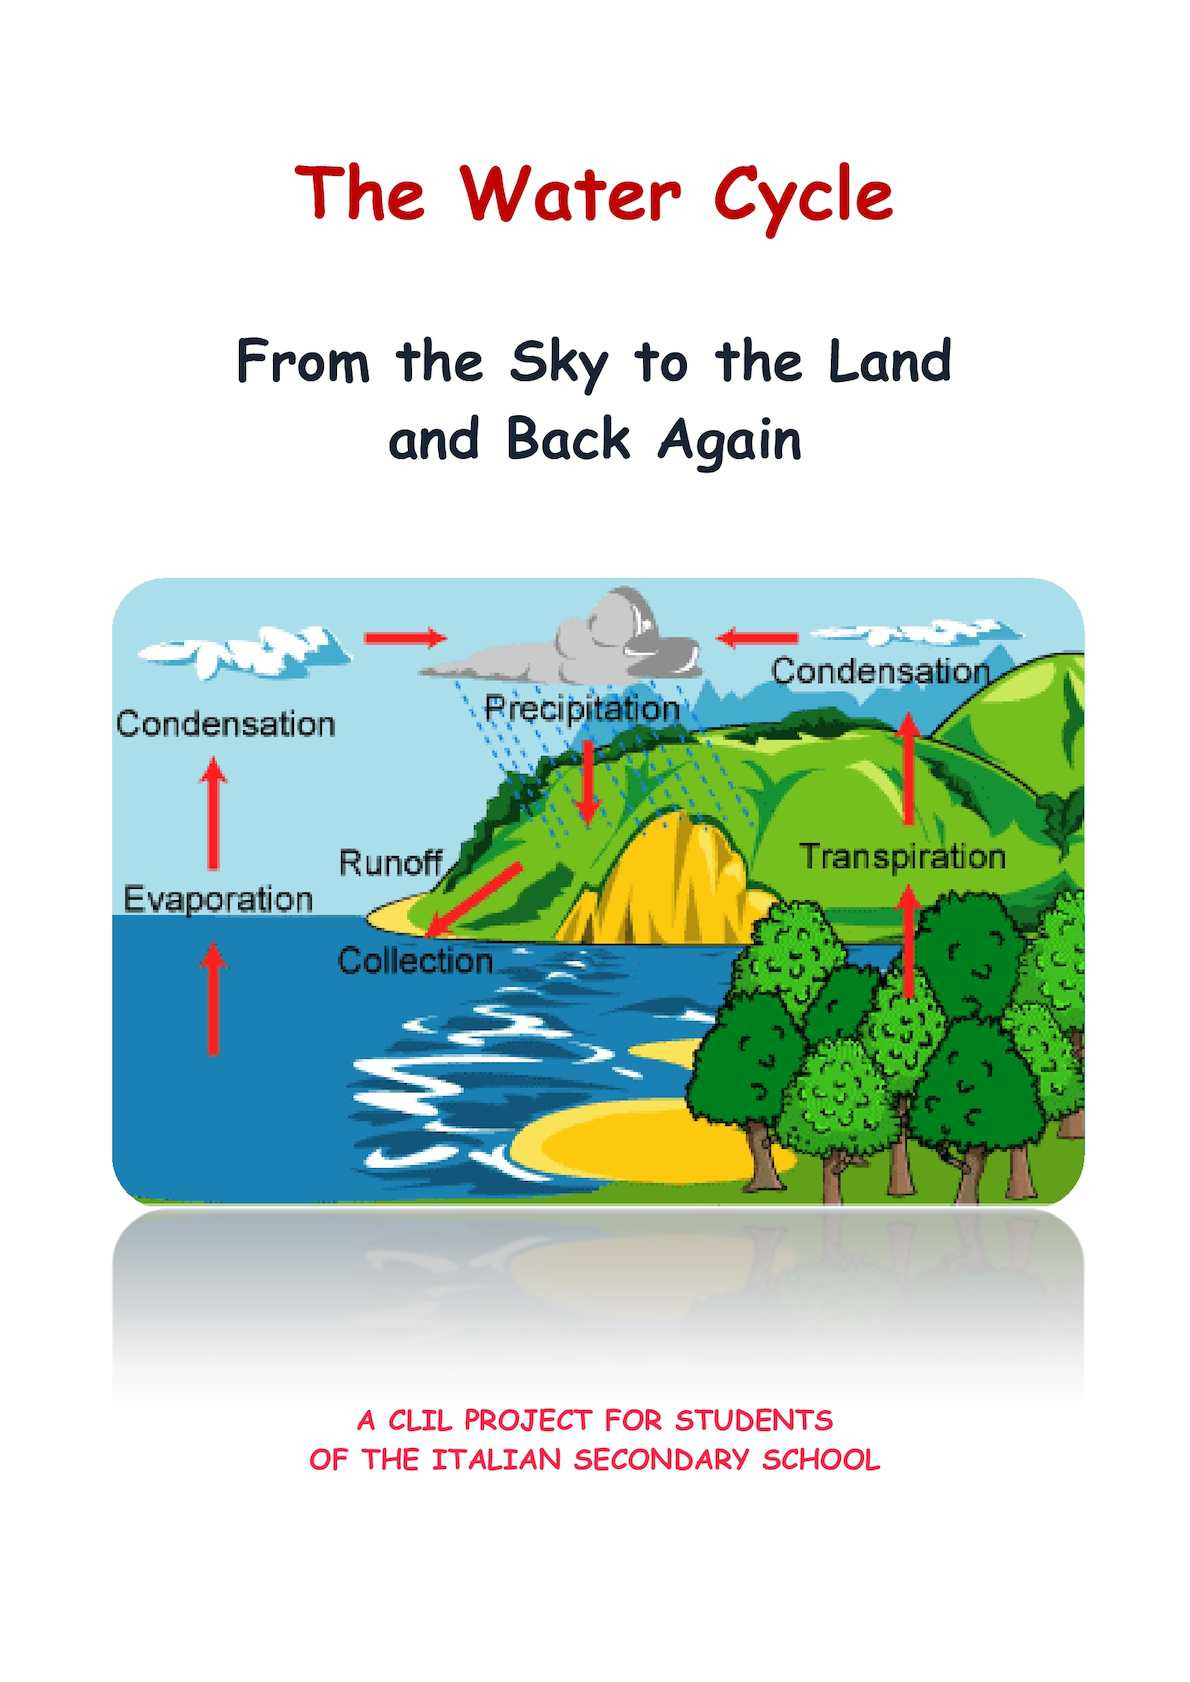 Water Cycle Worksheet Middle School Calaméo the Water Cycle From the Sky to the Land and Back